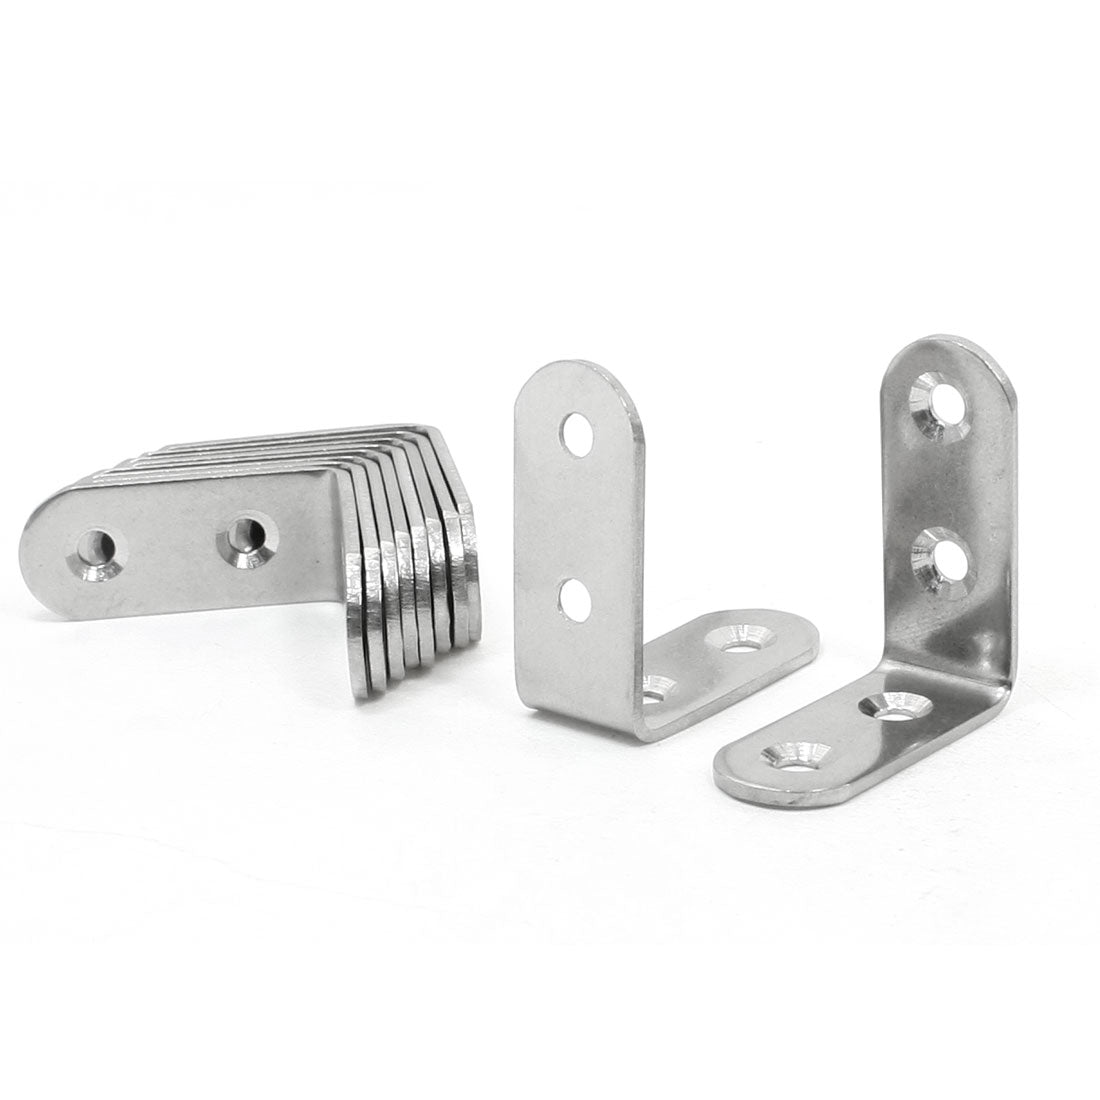 uxcell Uxcell 40mm x 40mm x 17mm Stainless Steel 90 Degree Angle Bracket 10 Pcs